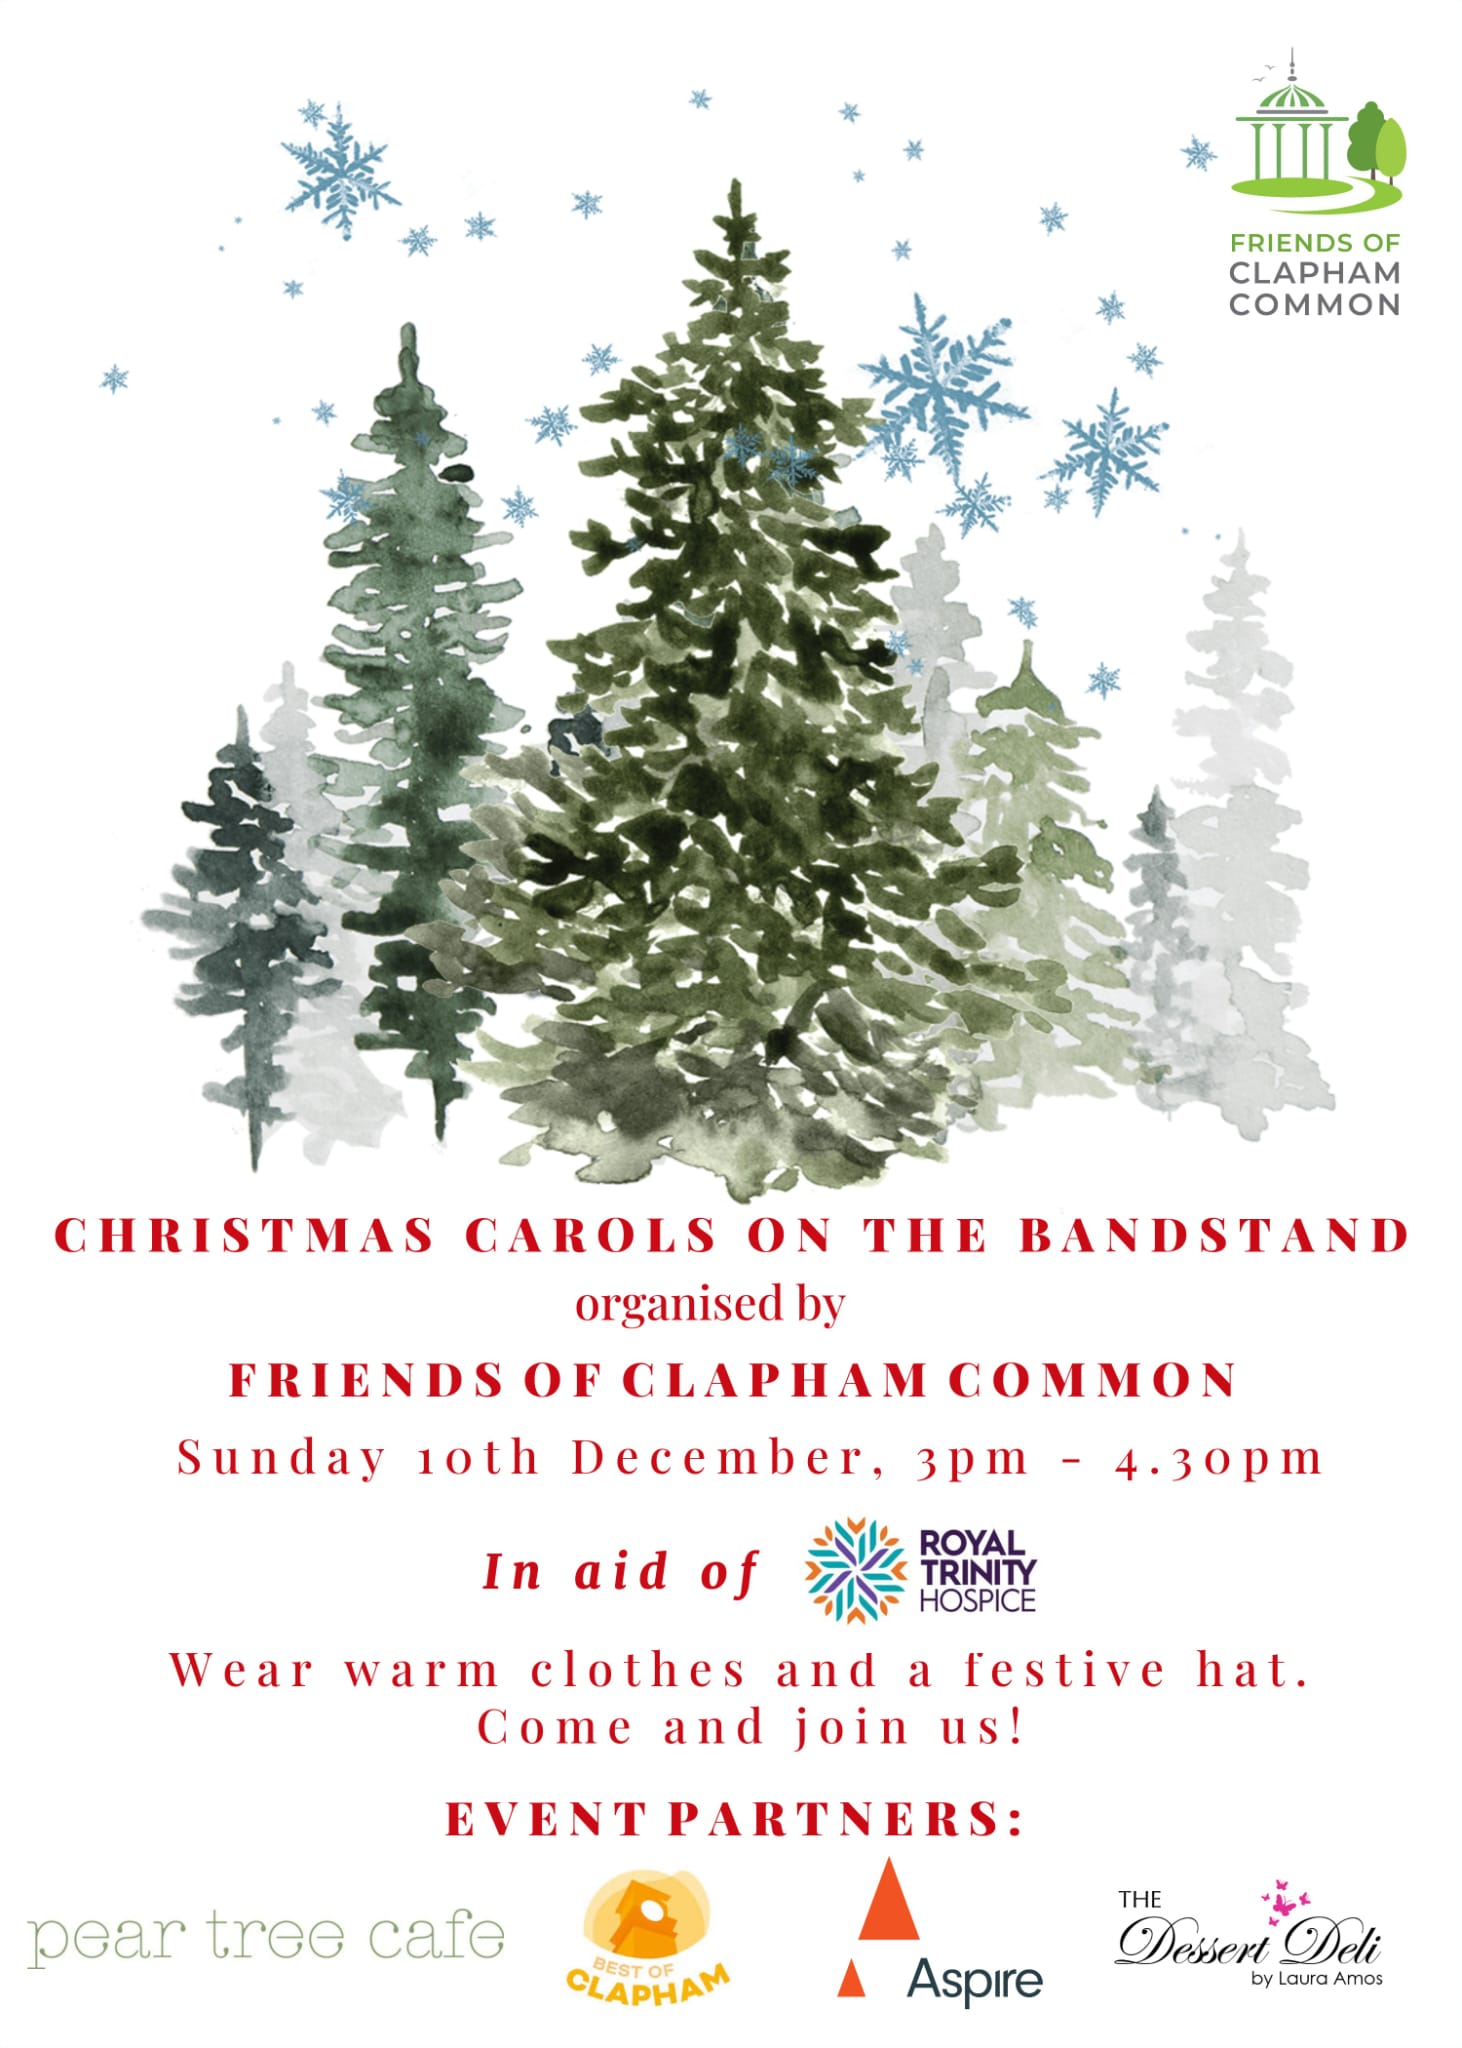 Christmas Carol by the bandstand Clapham common